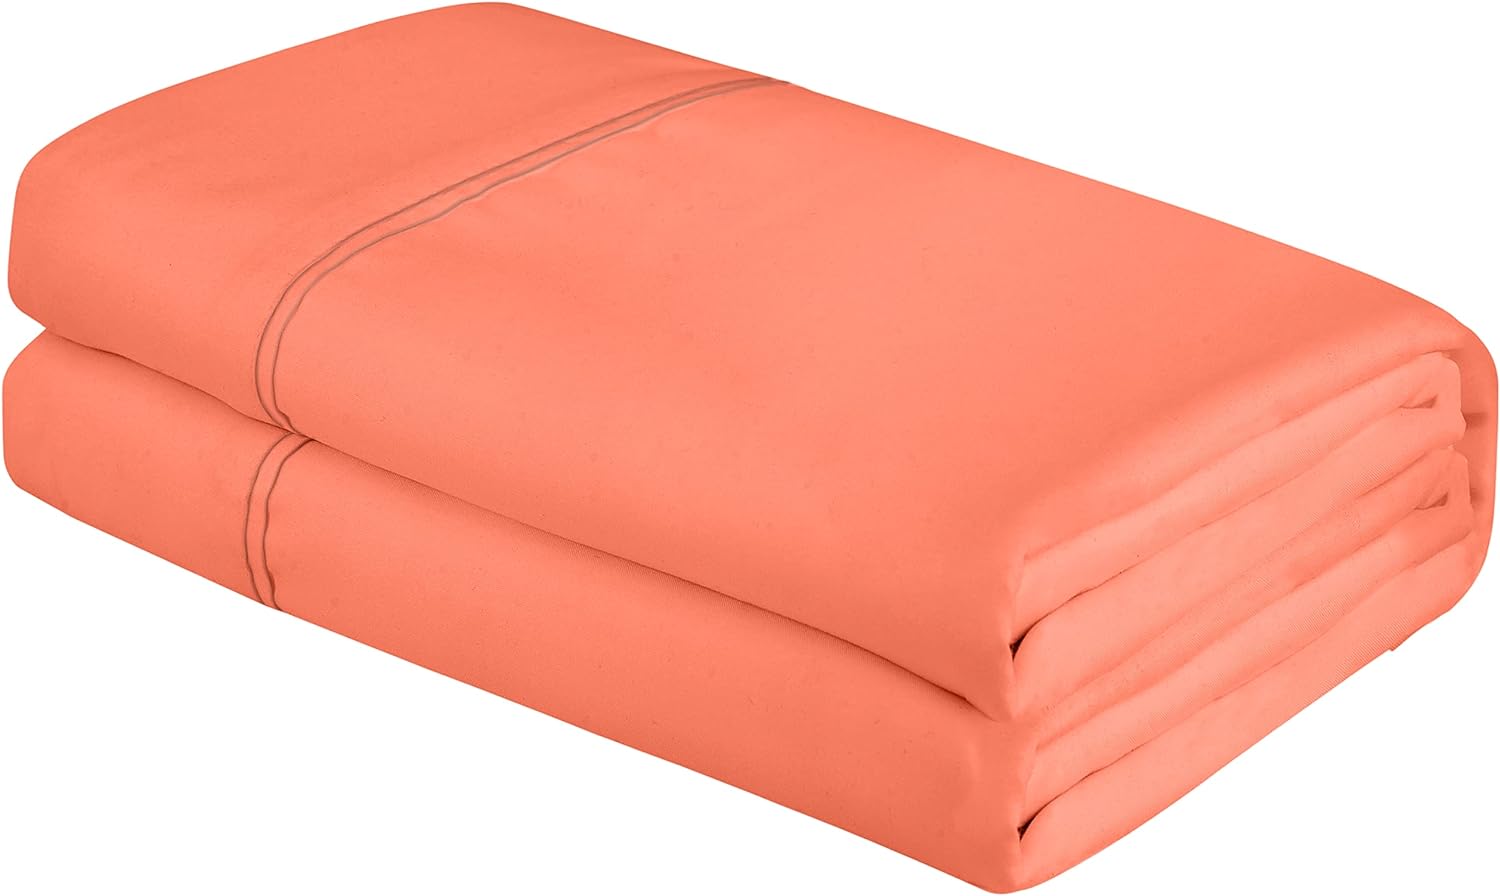 Royale Linens King Size Flat Sheet Only - Brushed 1800 Microfiber - Ultra Soft & Breathable - Wrinkle & Stain Resistant - Hotel Quality Flat Sheet Sold Separately - Top Sheet for Bed - (King, Coral)